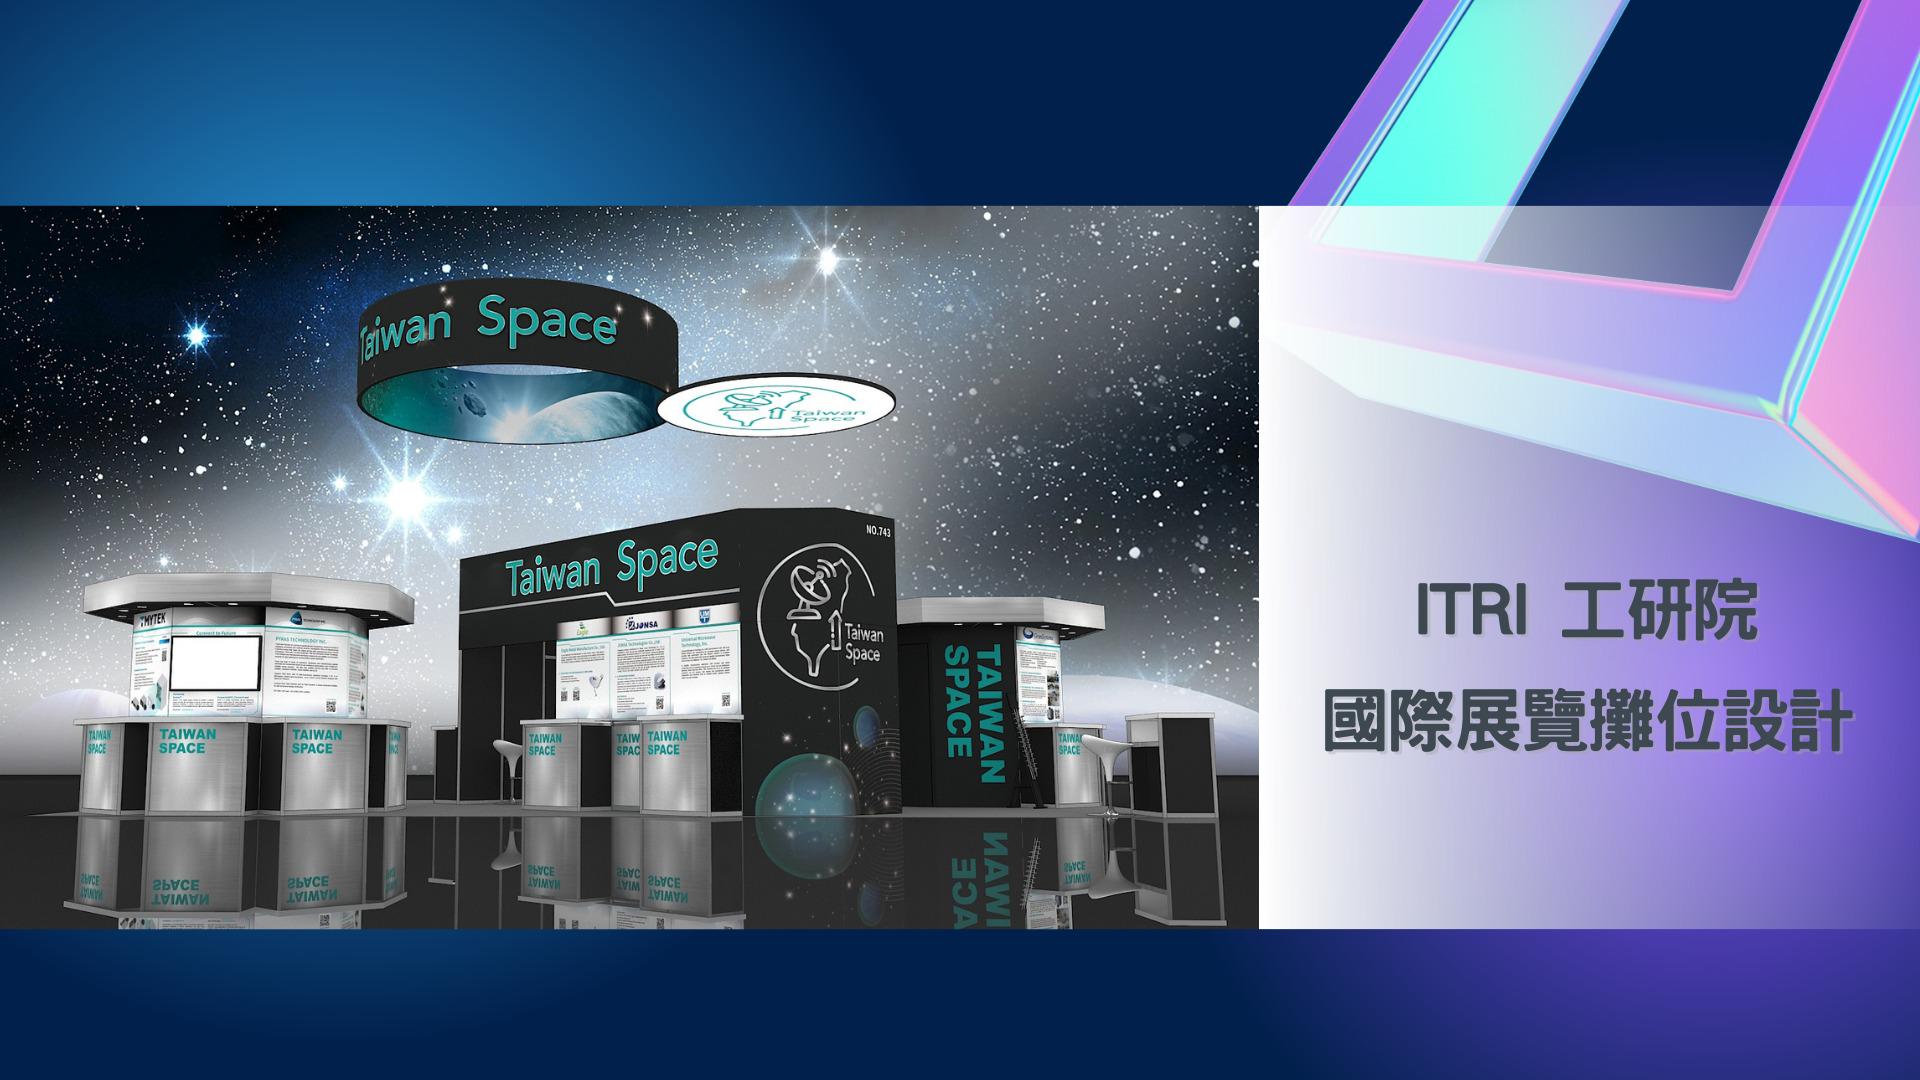 Wang Yi Design, Exhibition Design, Booth Design, TaiwanSpace Taiwan Image Hall, ITRI Industrial Research Institute, Satellite2022, US Satellite Communication Exhibition